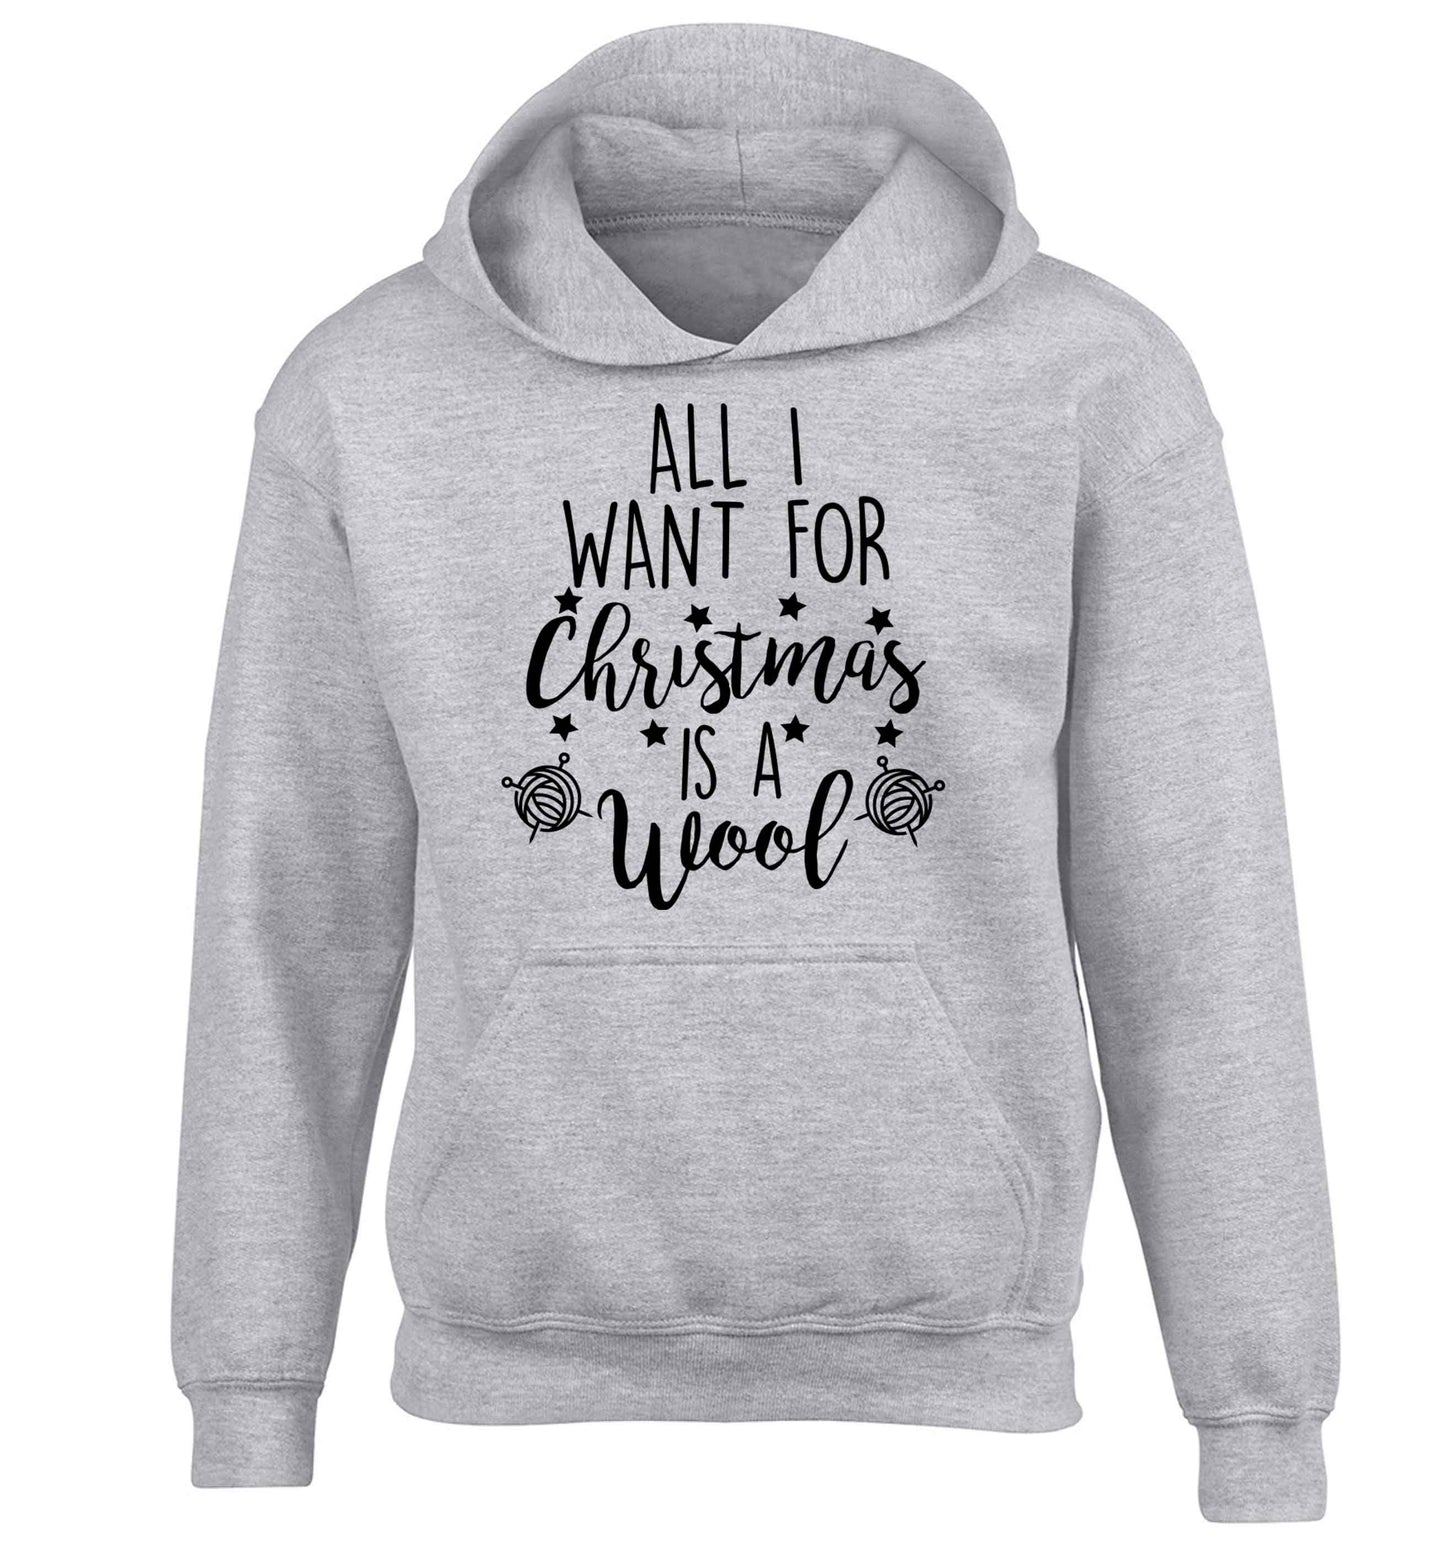 All I want for Christmas is wool! children's grey hoodie 12-13 Years